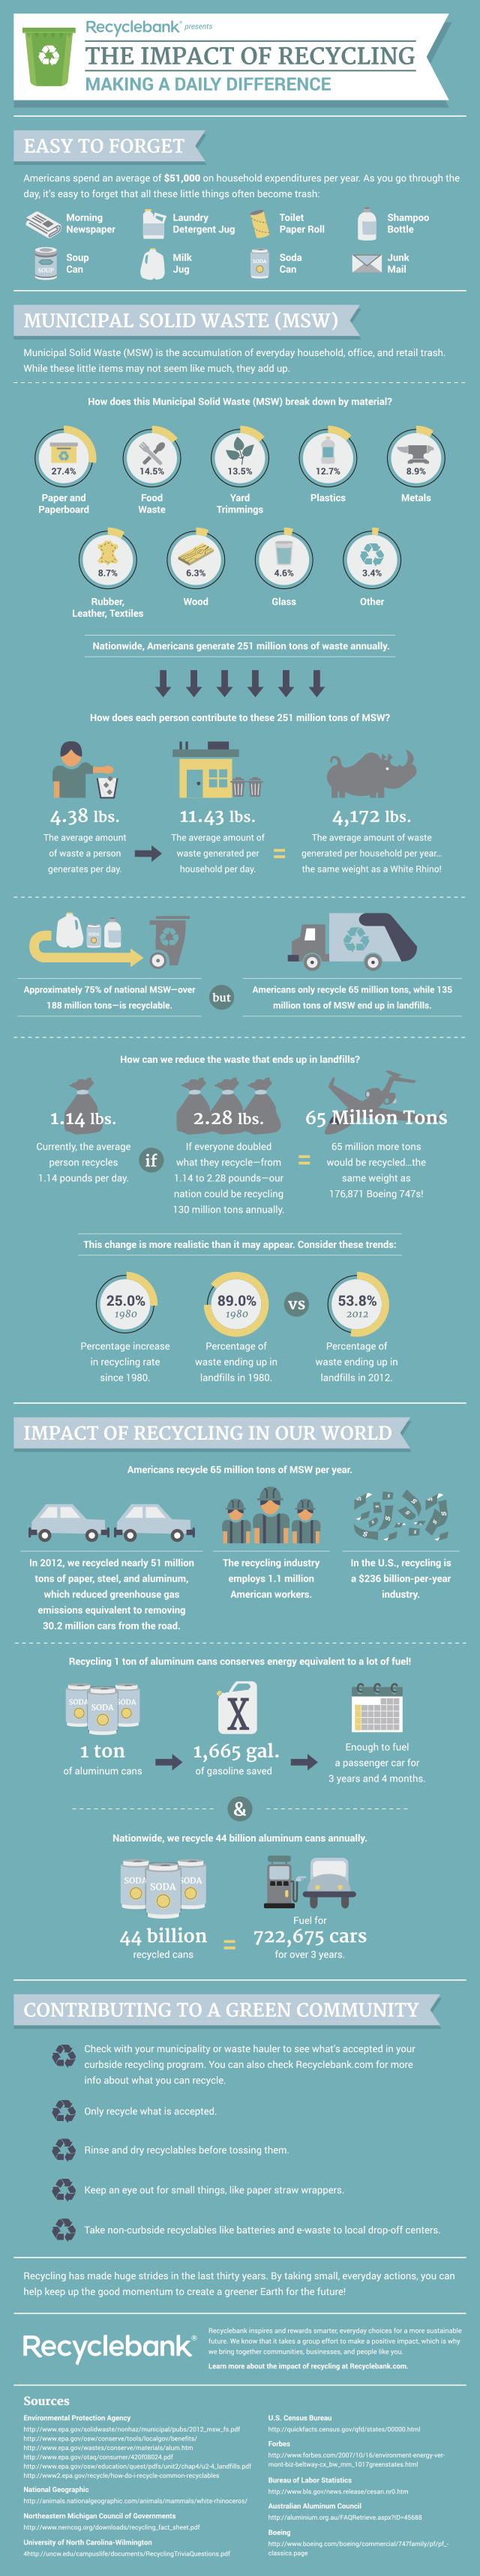 The Impact Of Recycling: Making A Daily Difference